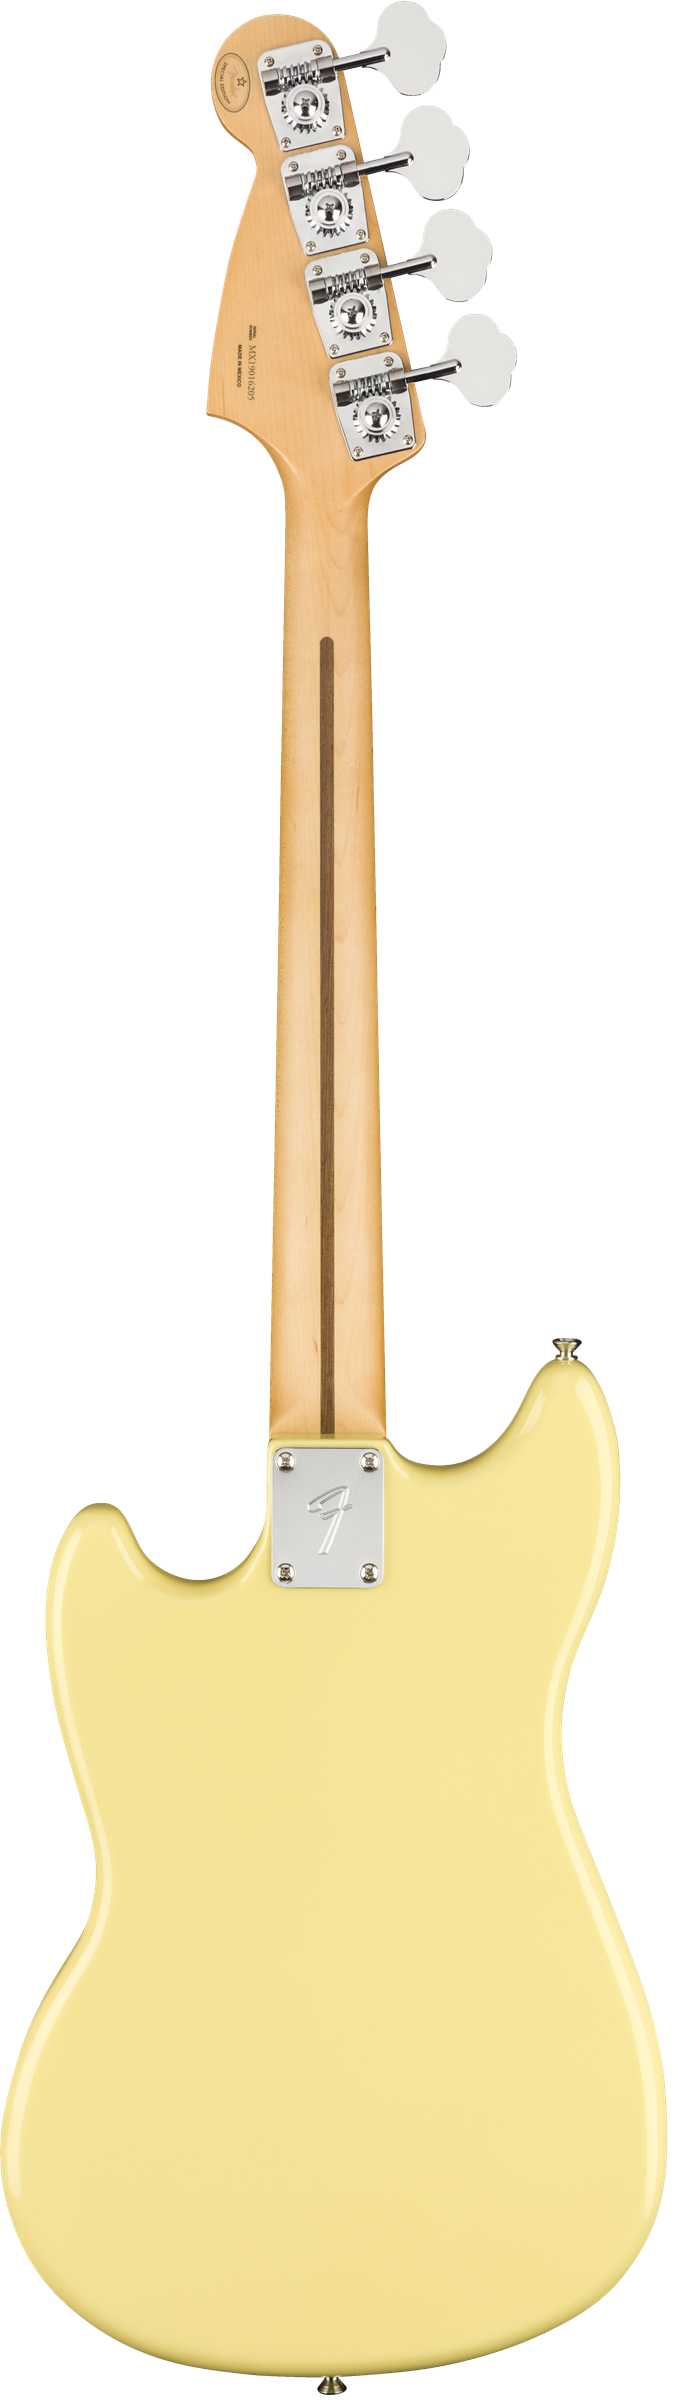 Fender Limited Edition Player Mustang Bass PJ - Canary